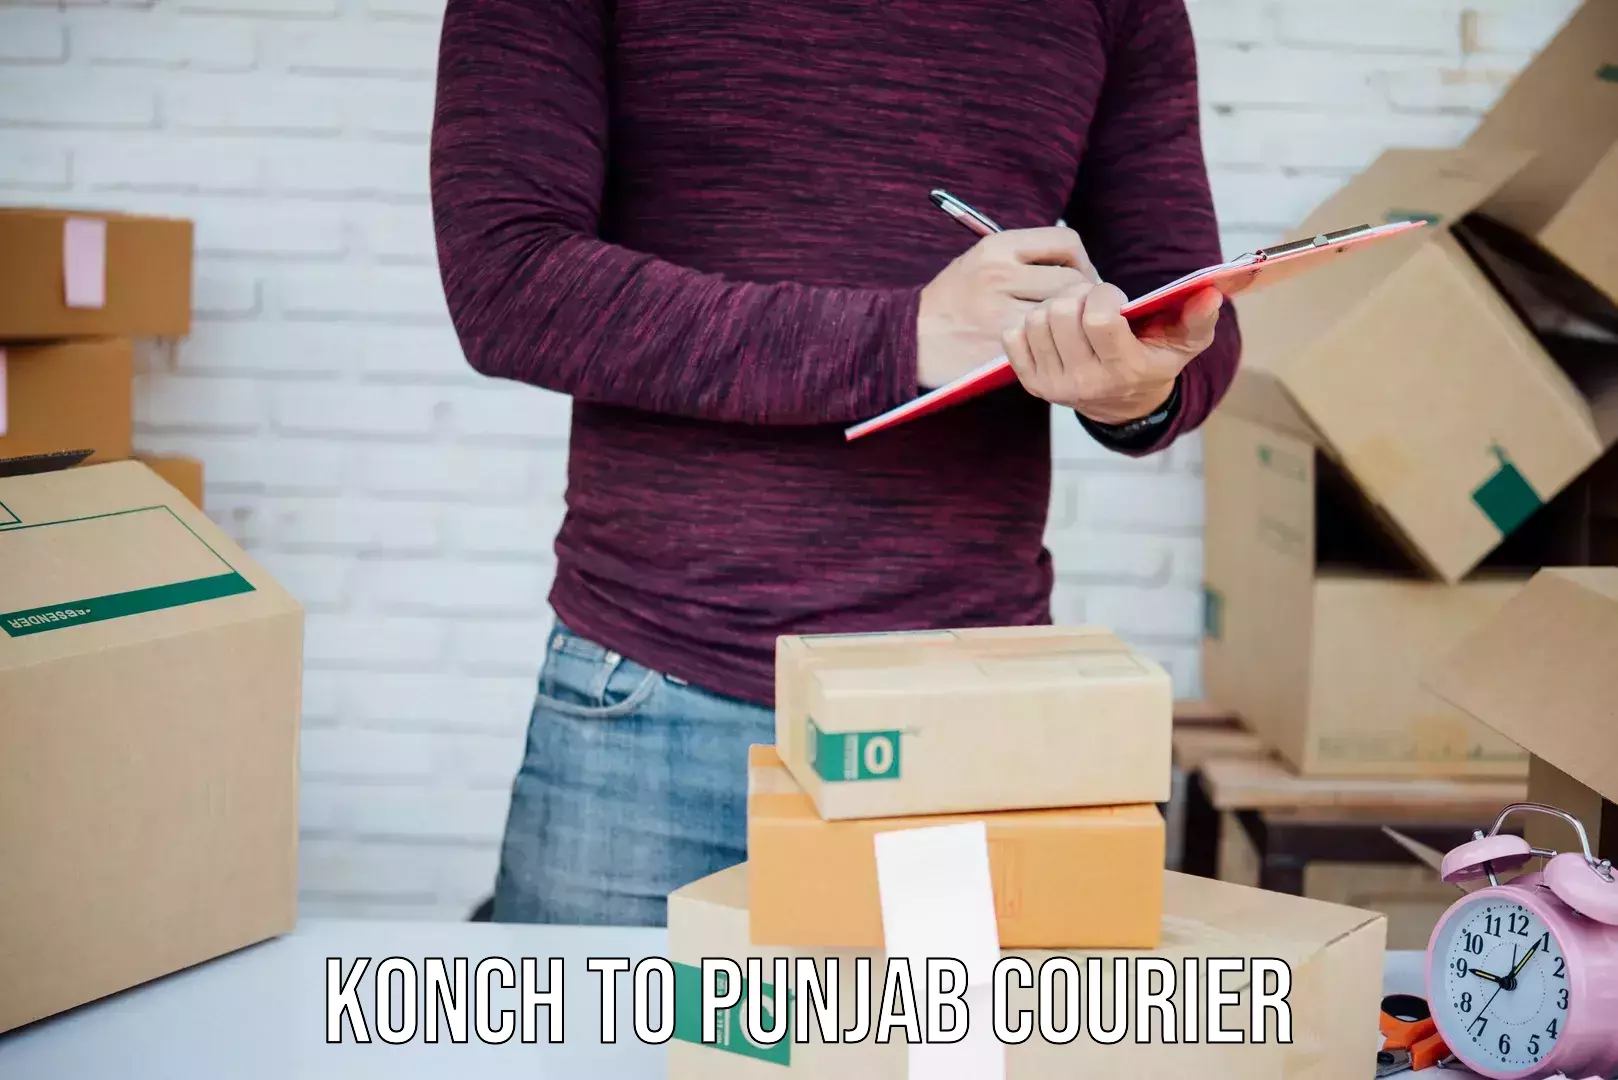 Premium courier services Konch to Patiala